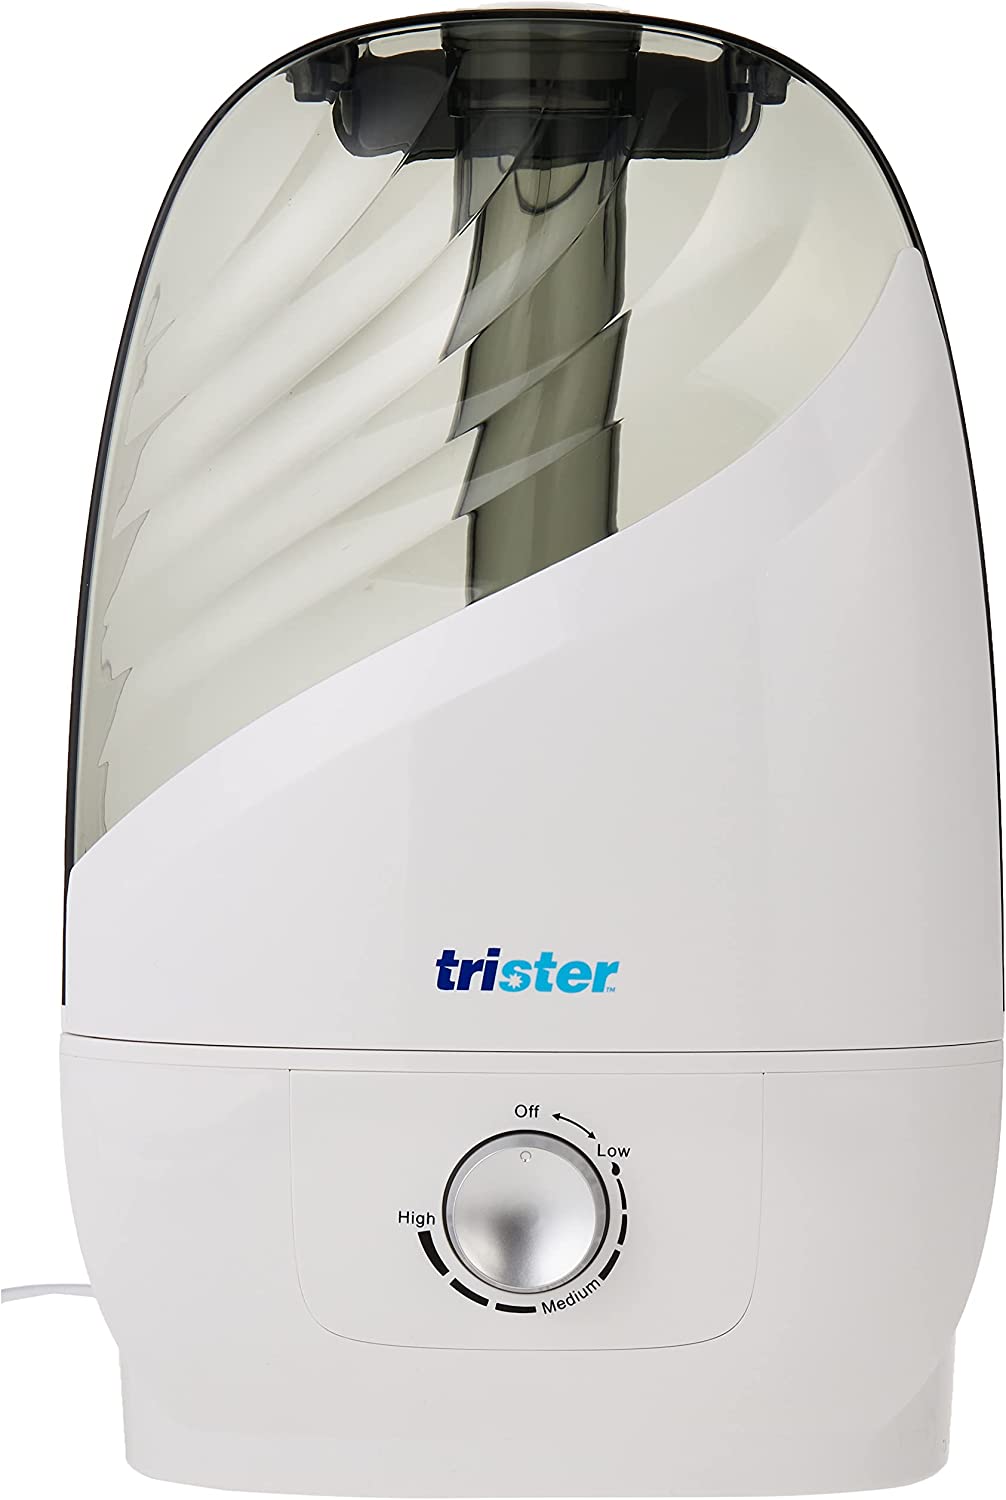 Trister Humidifier With Ionizer & Filter 5.8L : TS 155H5.8, Standard Packing